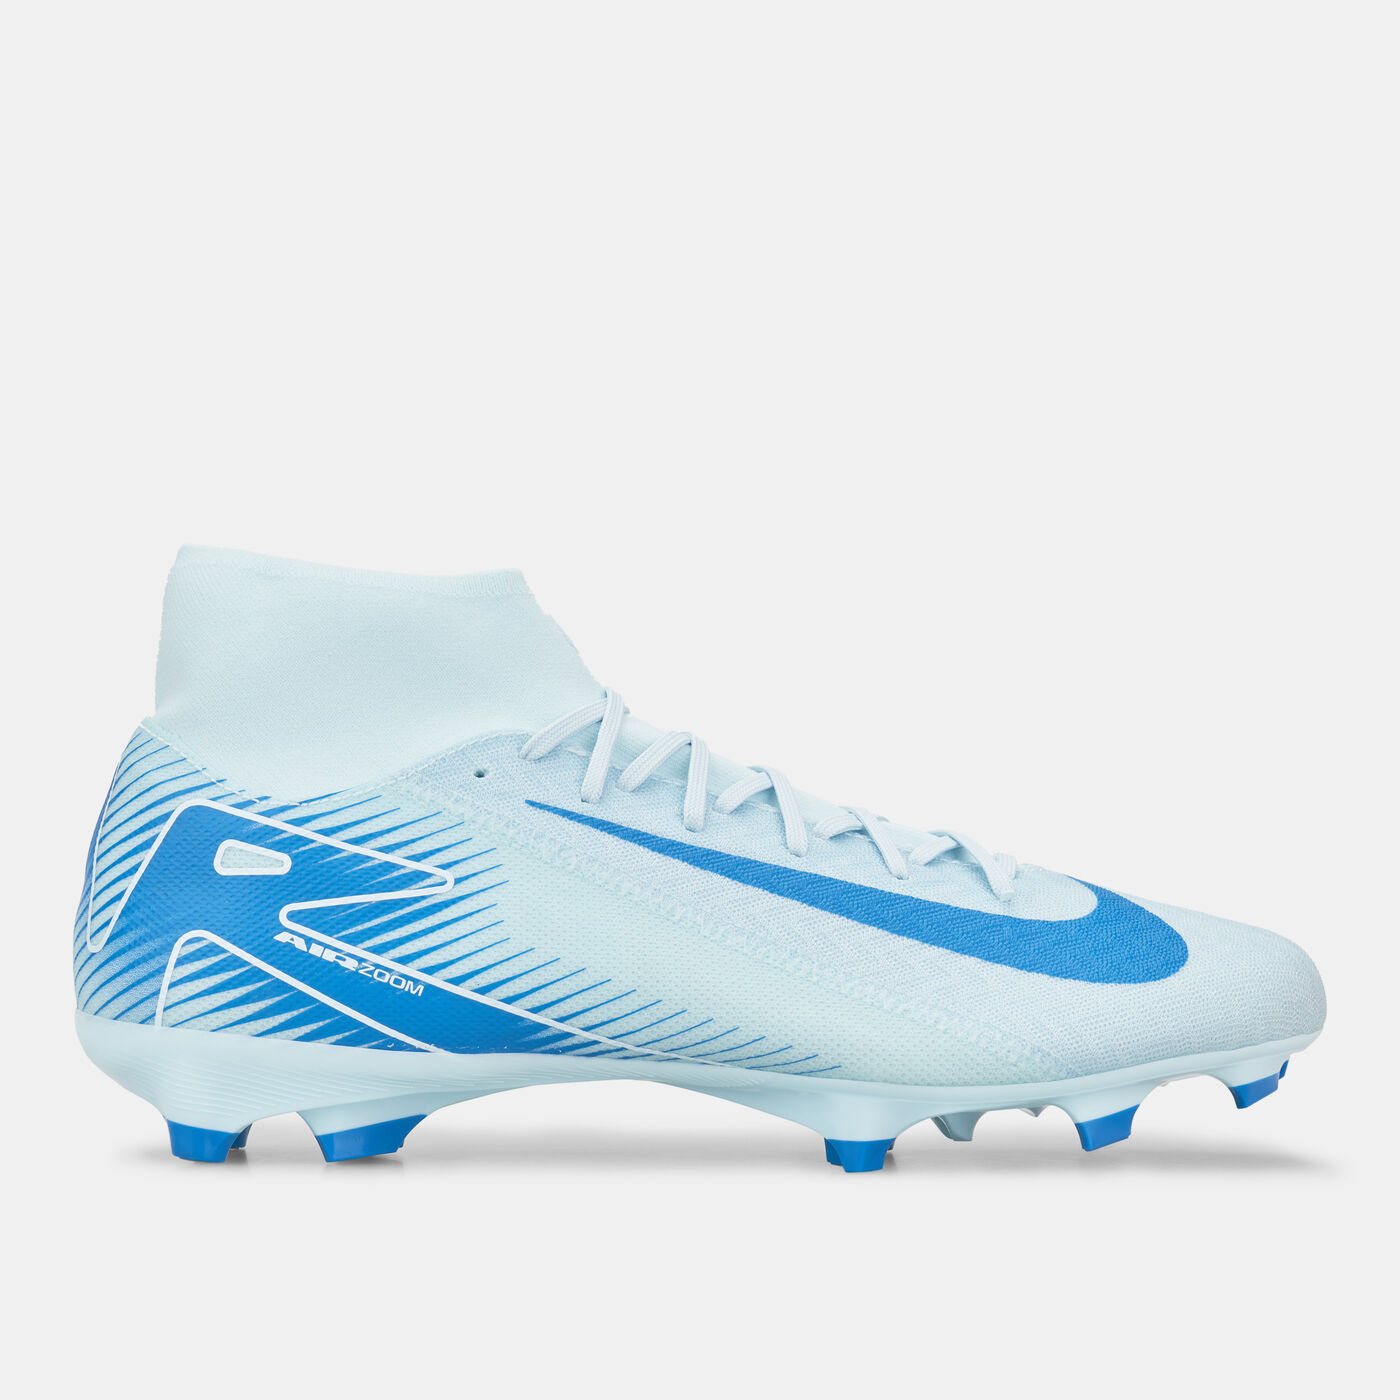 Men's Mercurial Superfly 10 Academy Multi-Ground Football Shoes